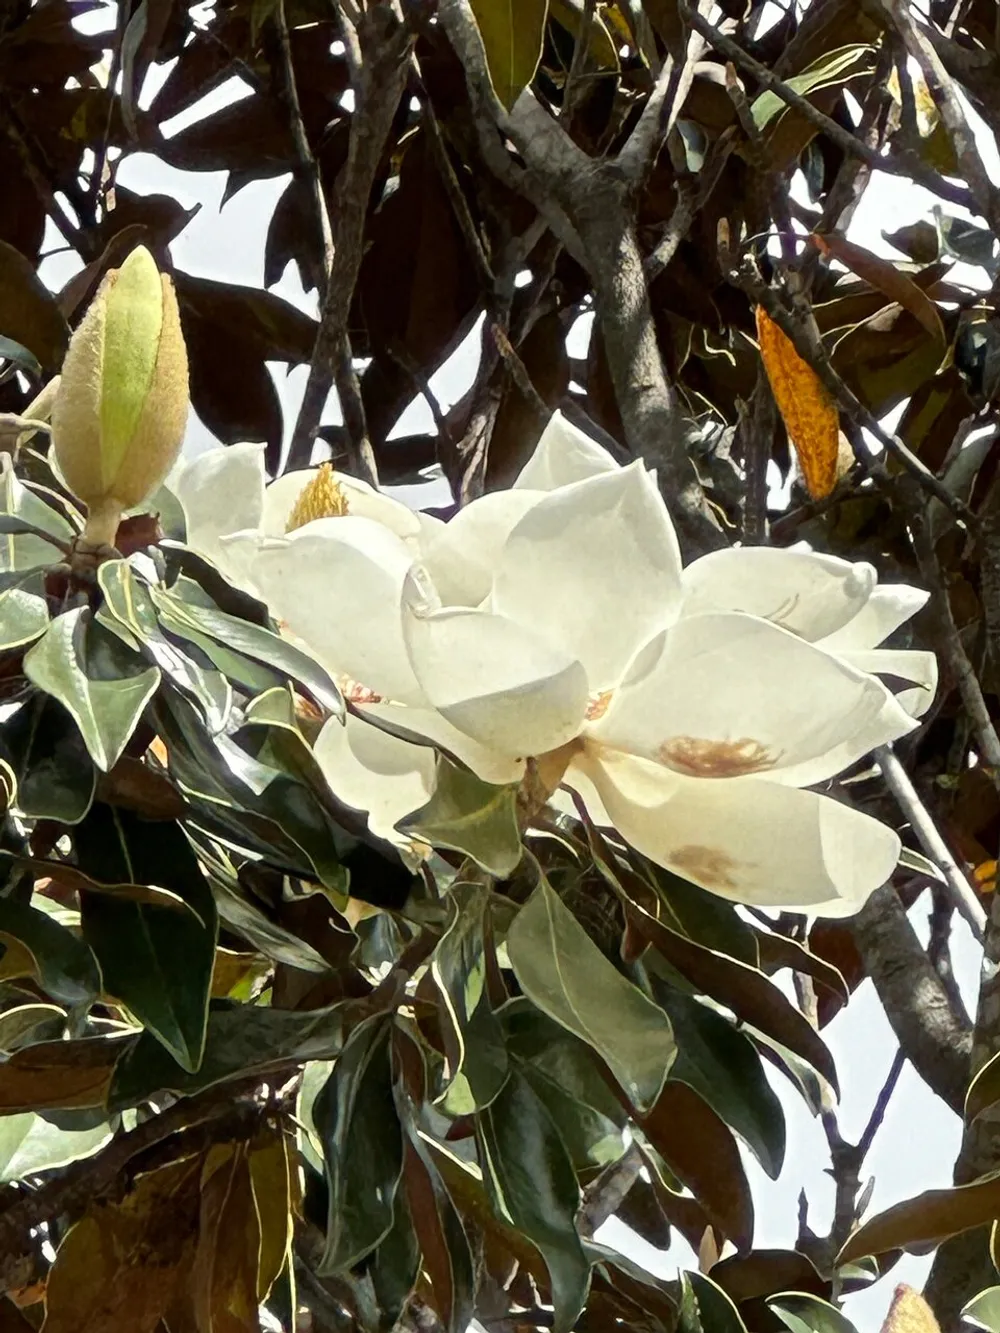 The image shows a large white magnolia flower in bloom among glossy green leaves on a magnolia tree